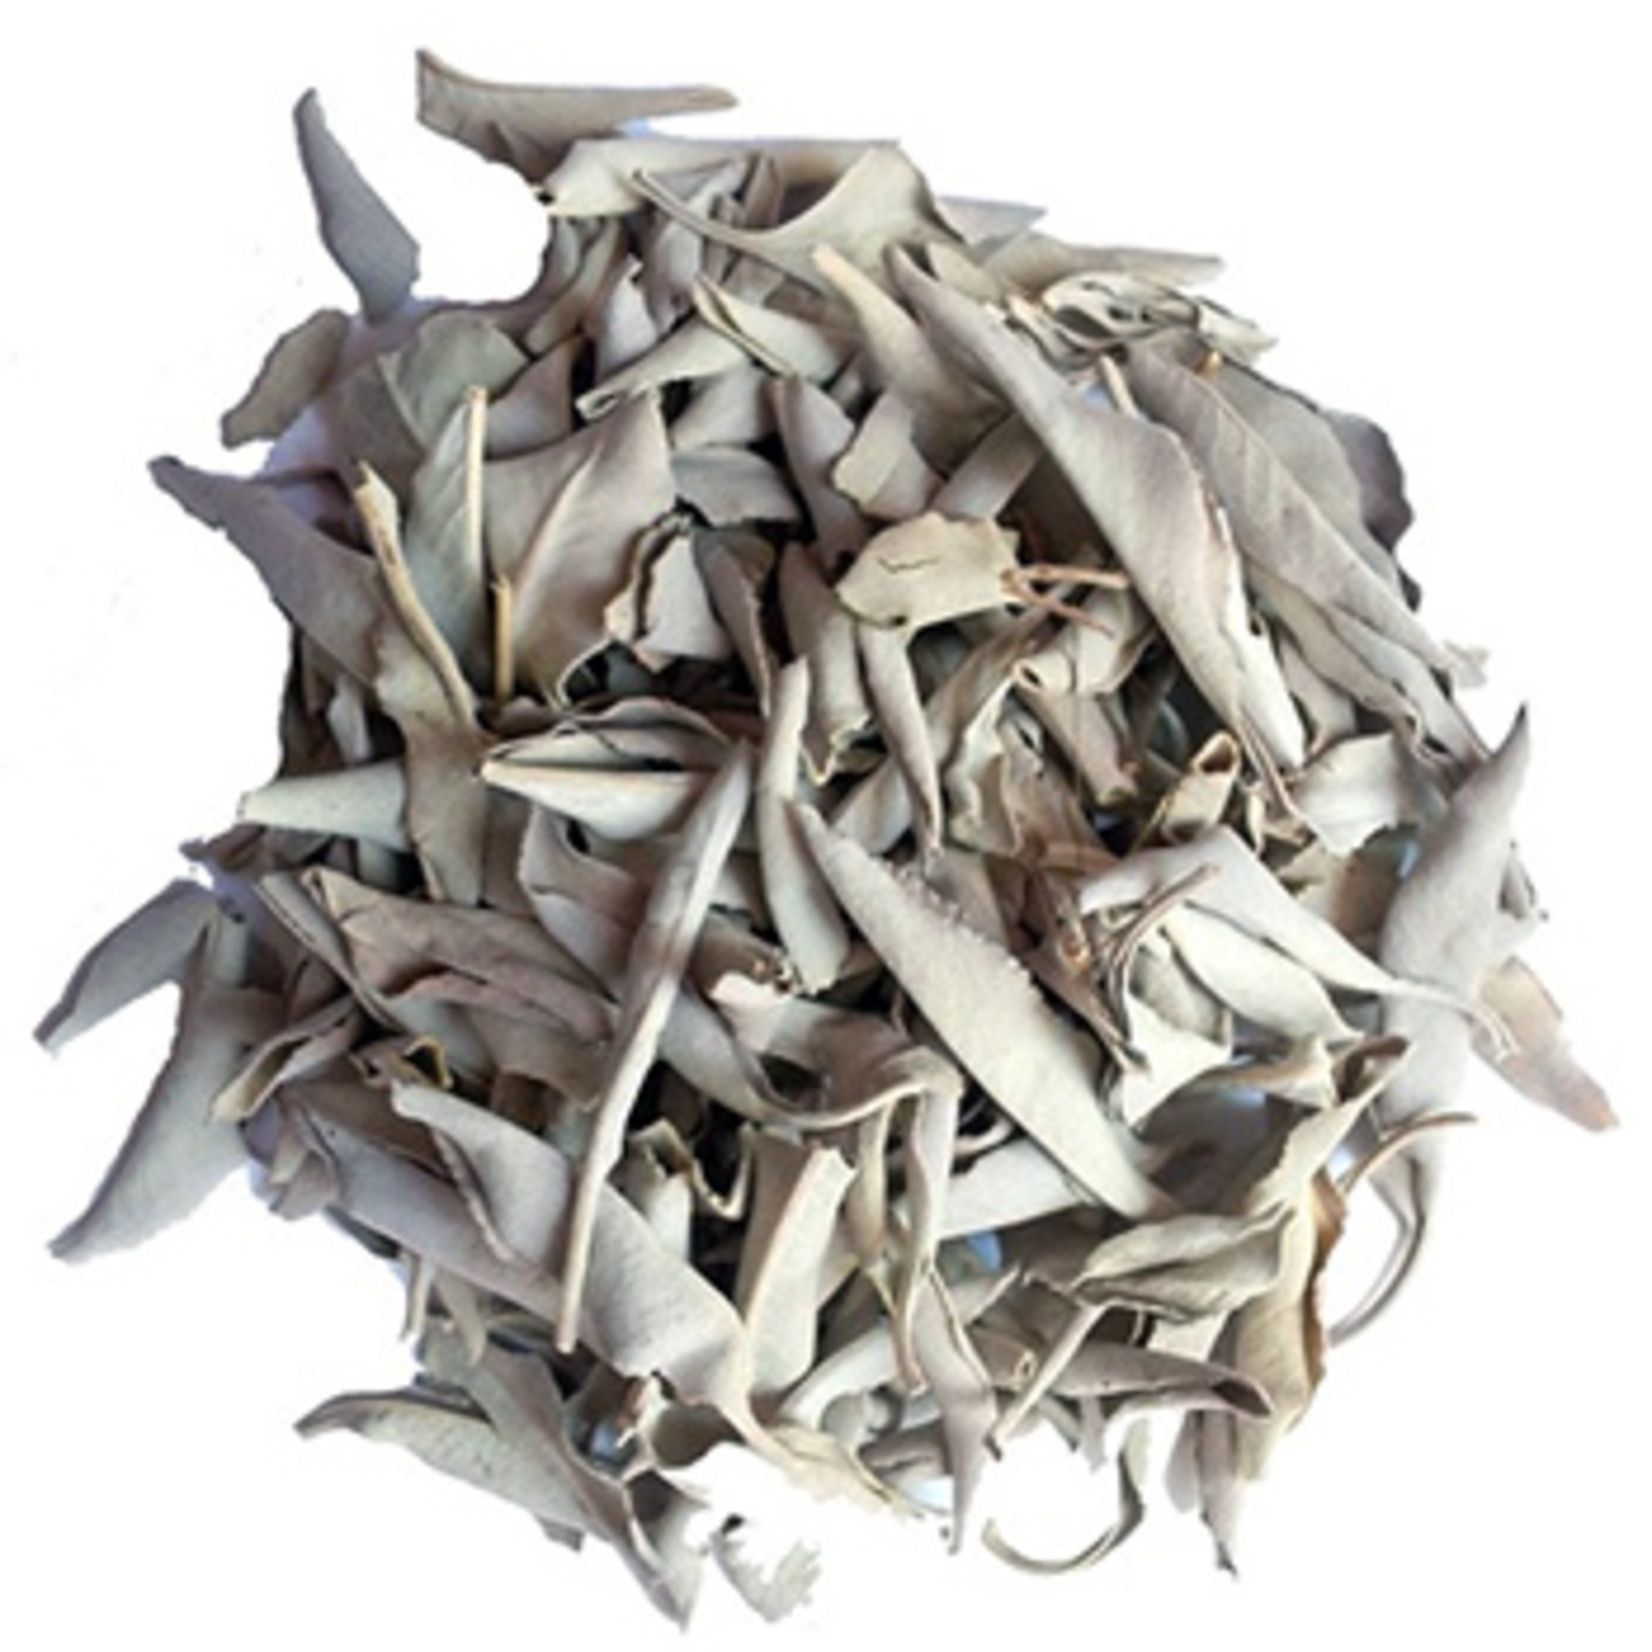 Pure California White Sage Cluster- 1 oz Package for Cleansing and Protection with 100% Natural Aromatic Herbs